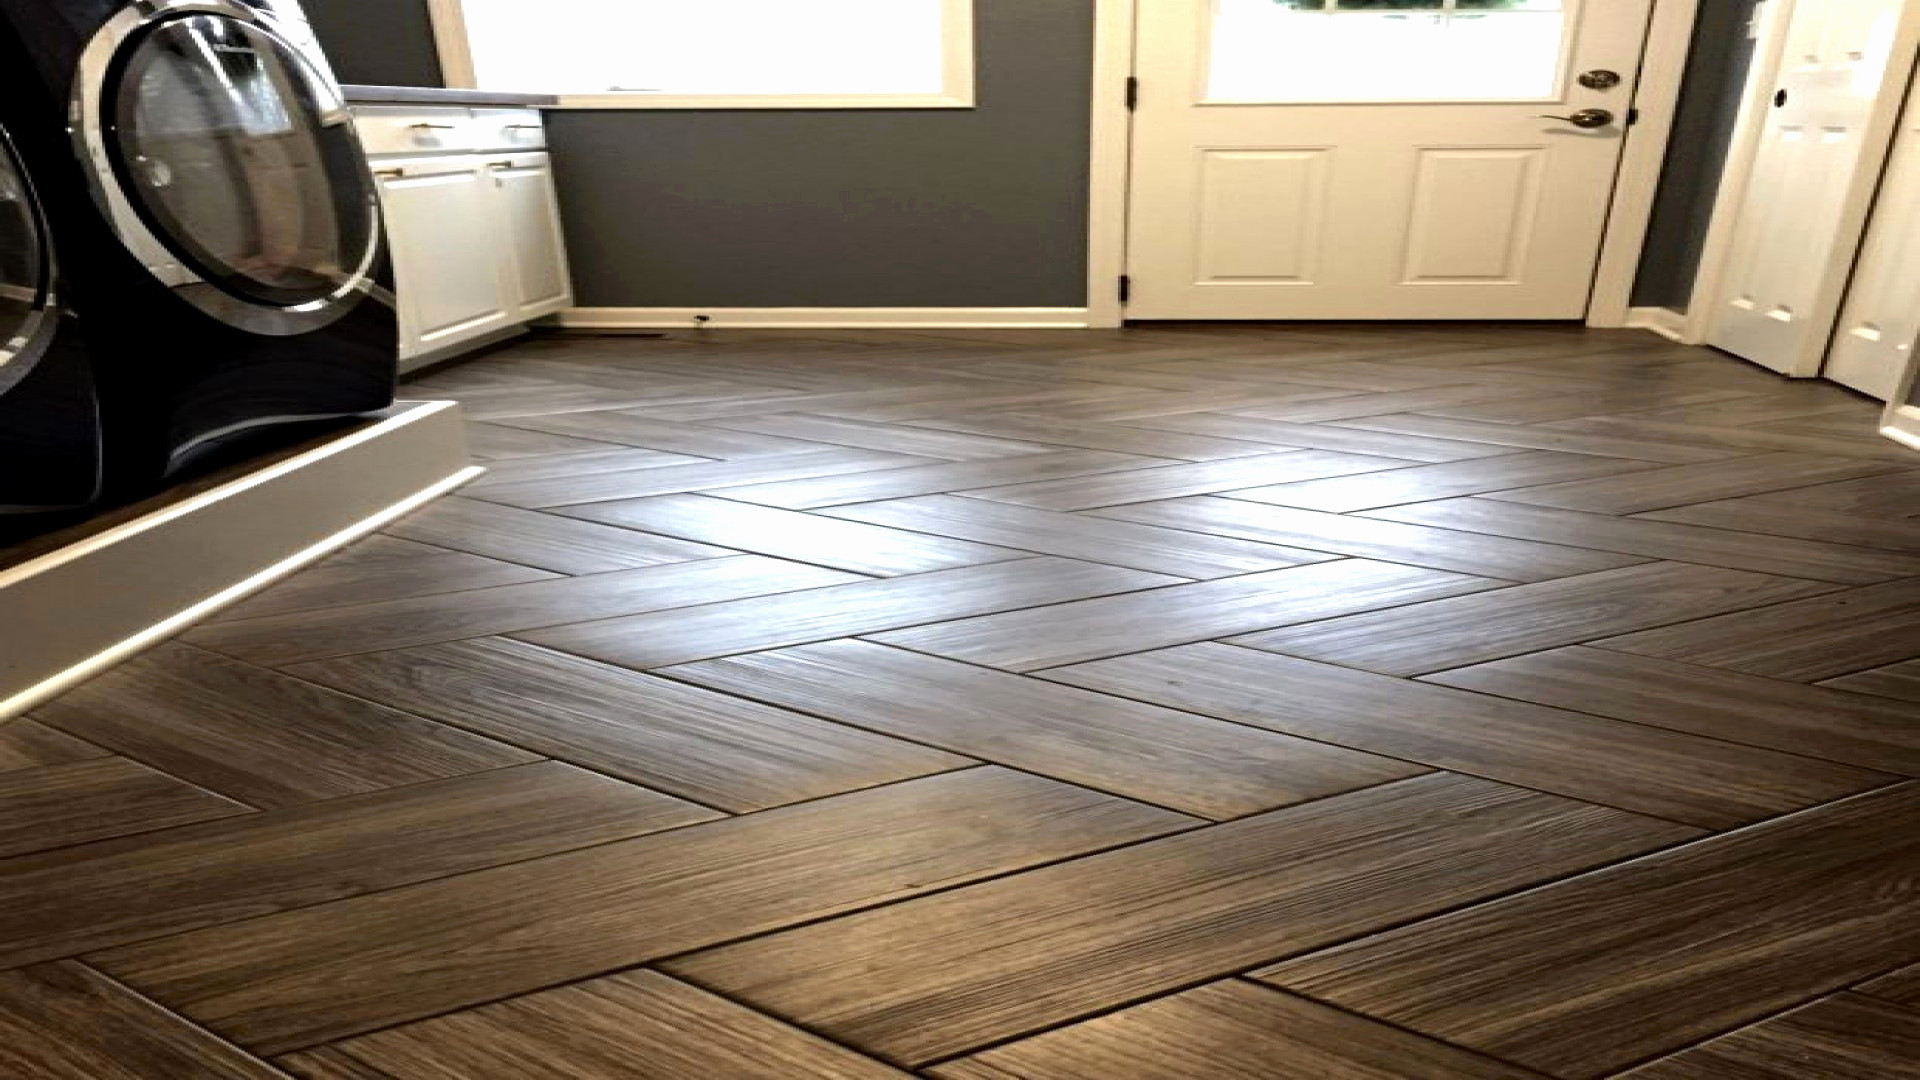 20 Perfect How to Lay Hardwood Floor Pattern 2024 free download how to lay hardwood floor pattern of flooring pros floor transition laminate to herringbone tile pattern with kitchen floor tiles home depot elegant s media cache ak0 pinimg 736x 43 0d 97 be